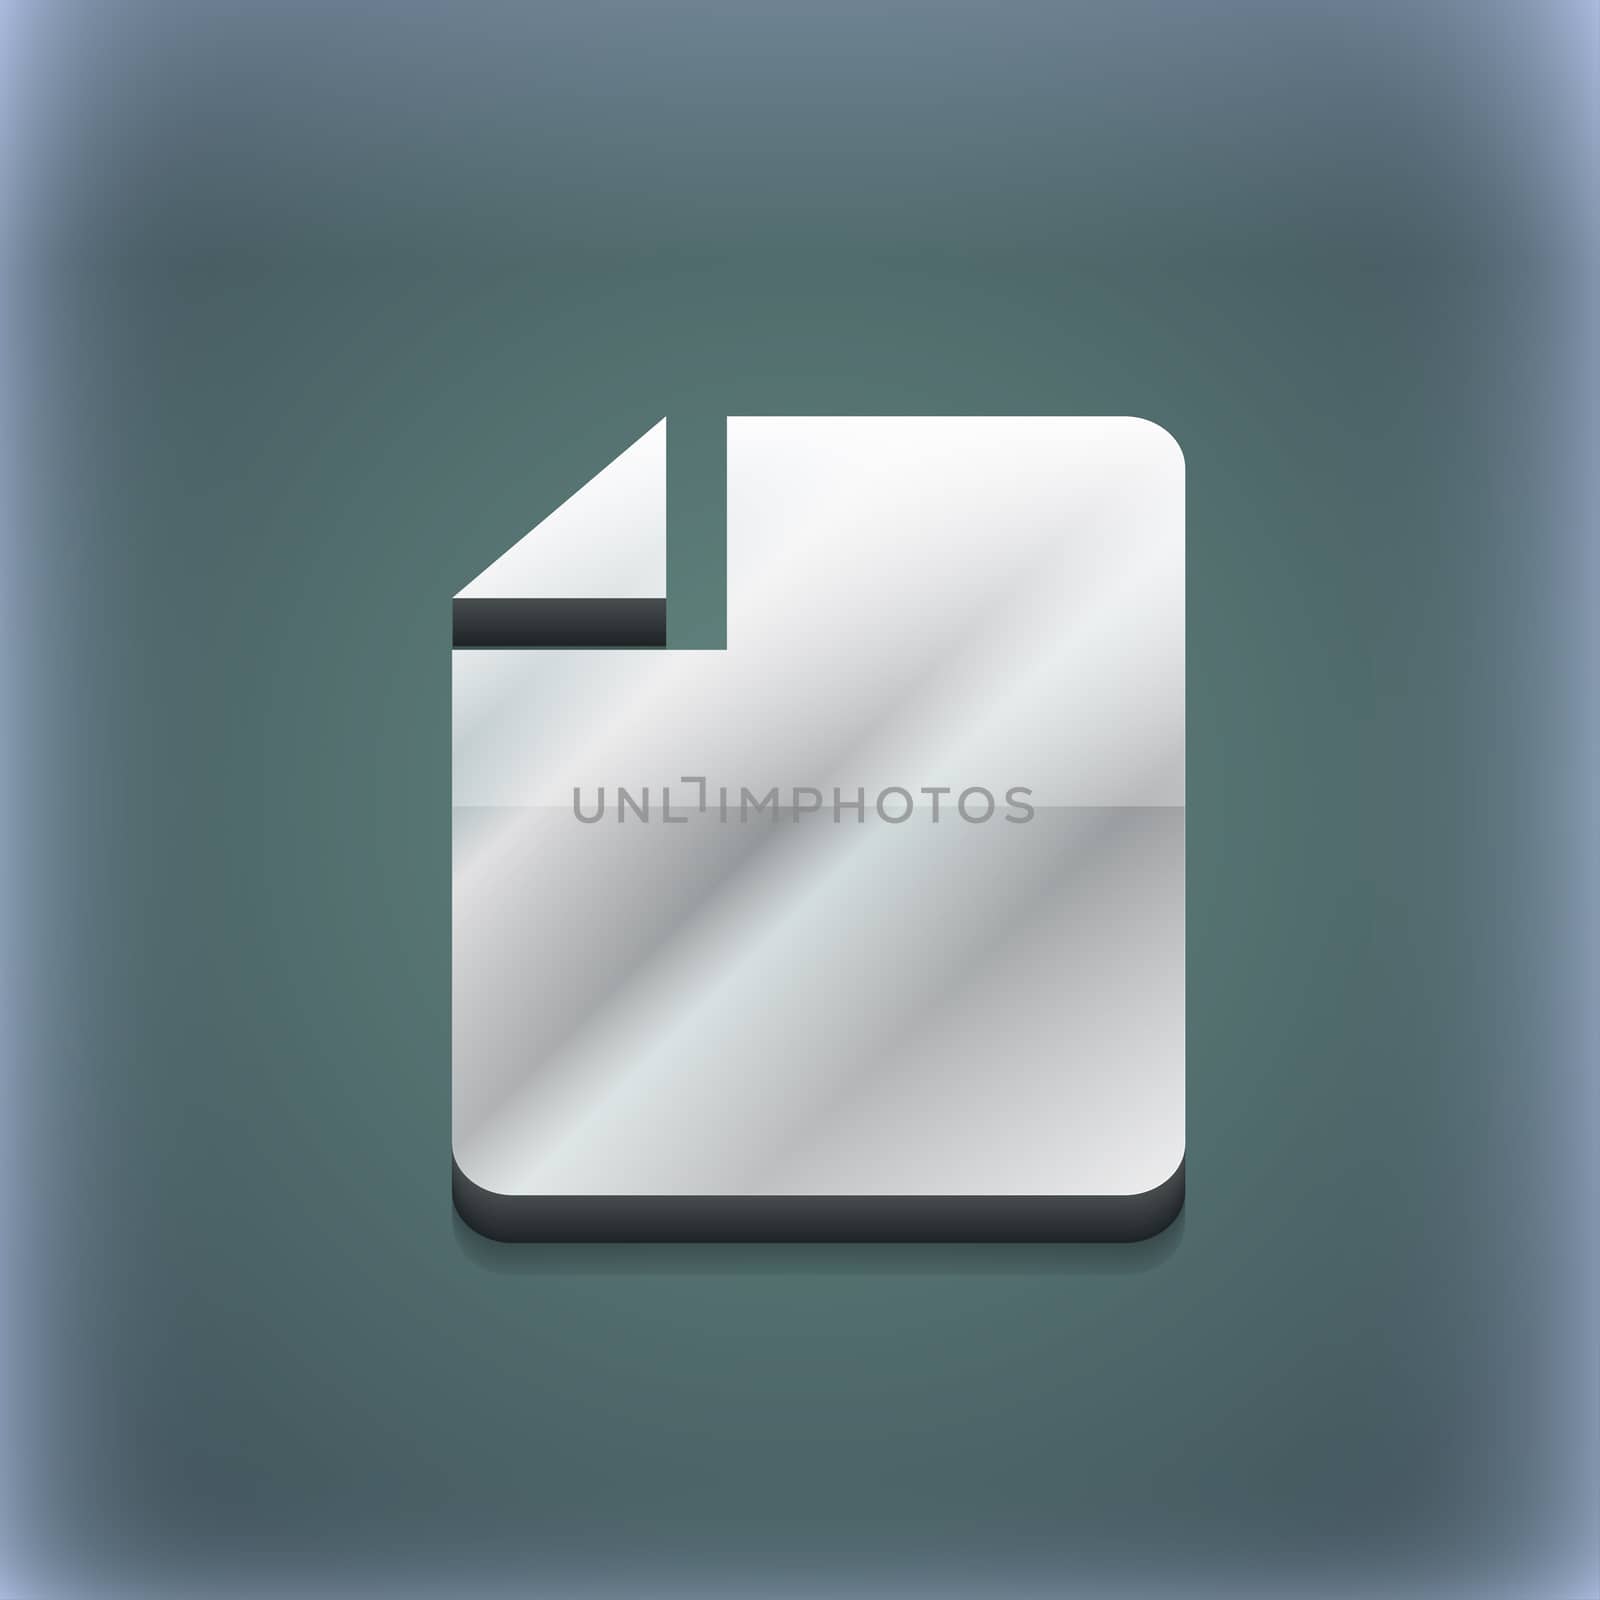 Text file icon symbol. 3D style. Trendy, modern design with space for your text illustration. Raster version